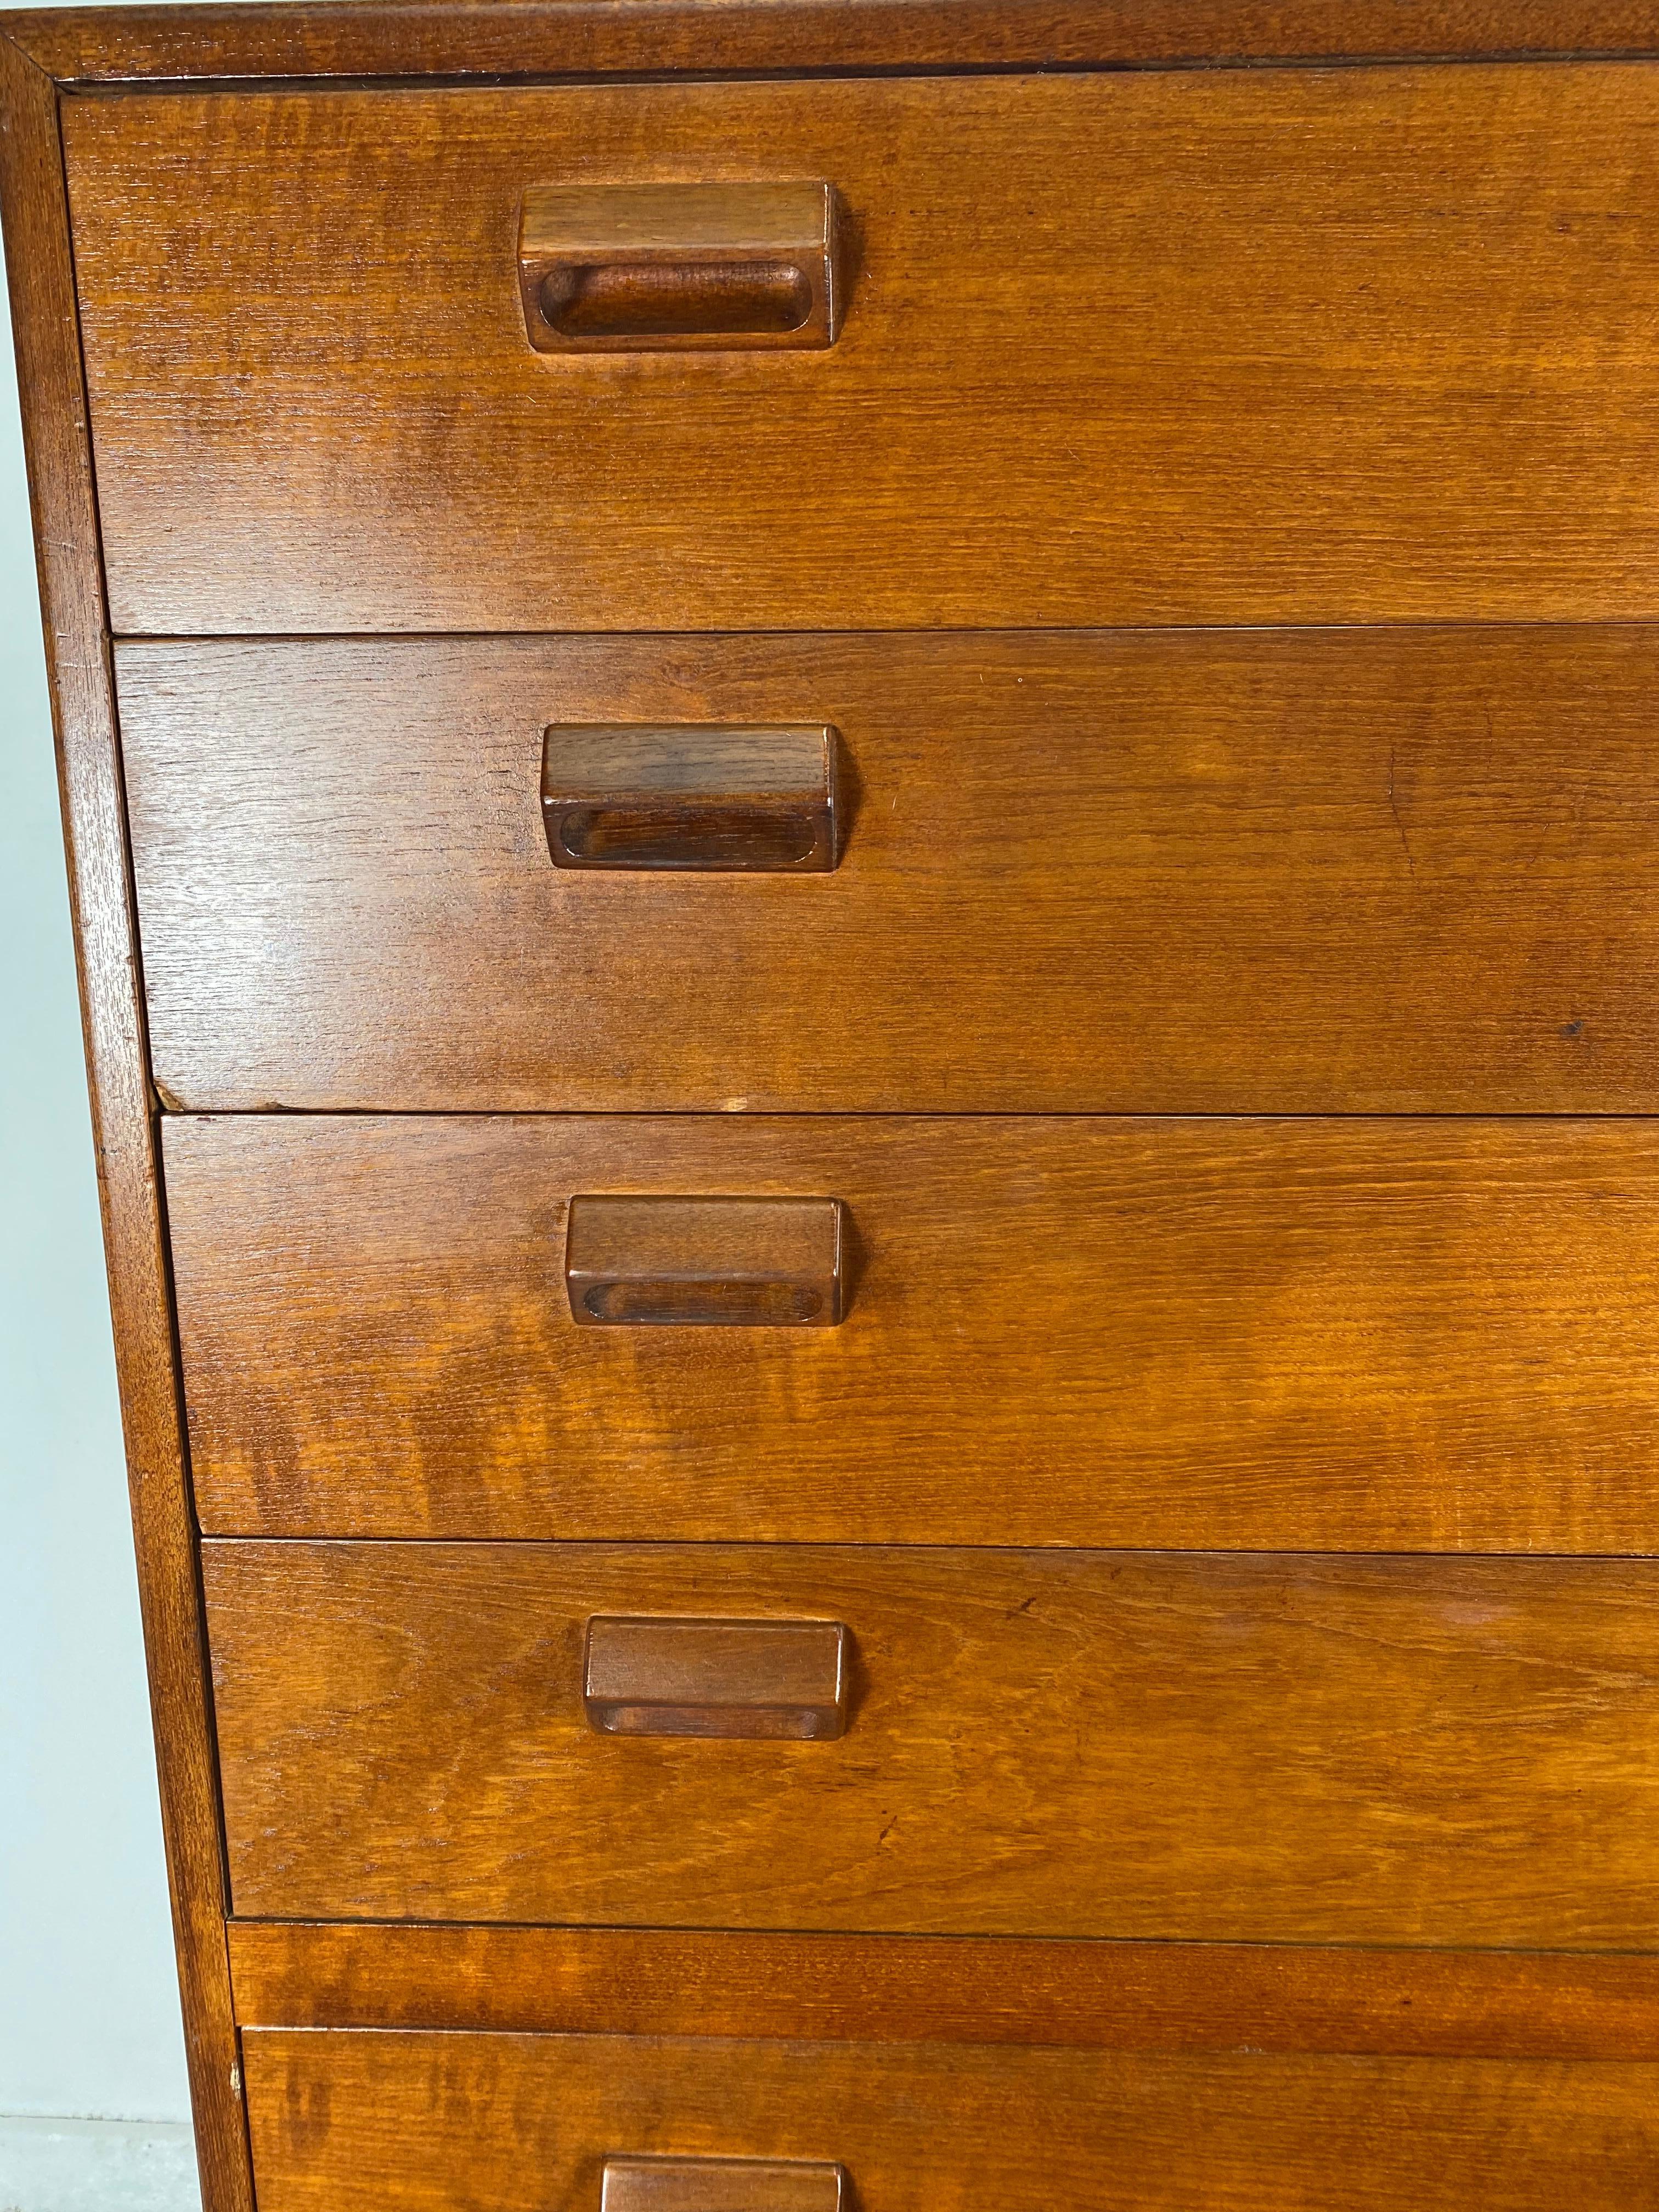 Stunning Teak  High dresser by Borge Mogensen for Neils Vodder, Denmark 1950s. A tall seven (7) drawer dresser or chest of drawers designed by Borge Mogensen. Dresser is constructed of solid teak wood with integrated wood handles on an oak base with